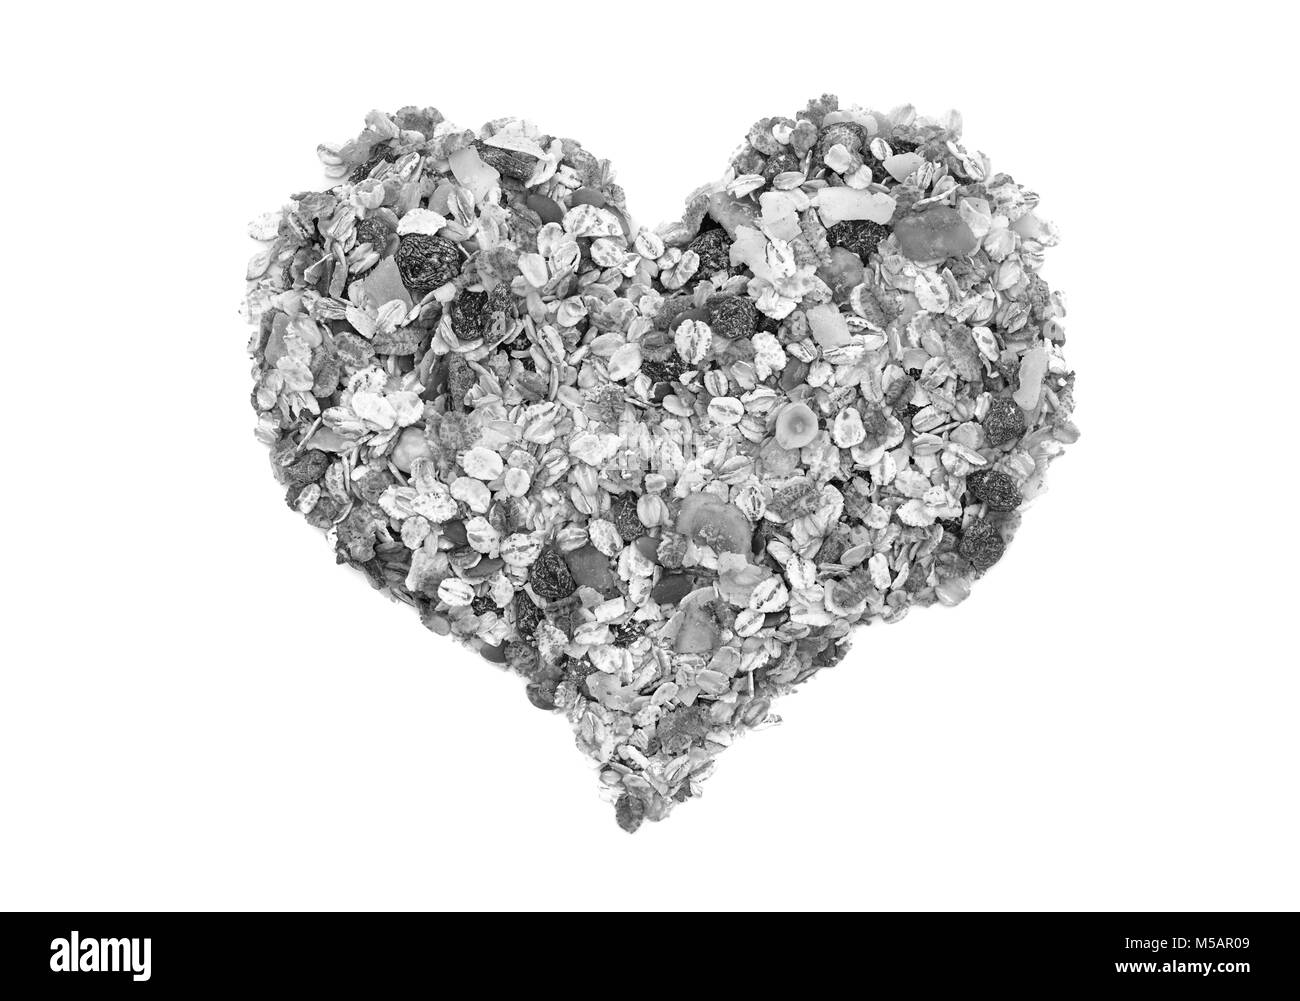 Muesli cereal grains, seeds, fruit and nut in a heart shape, isolated on a white background - monochrome processing Stock Photo